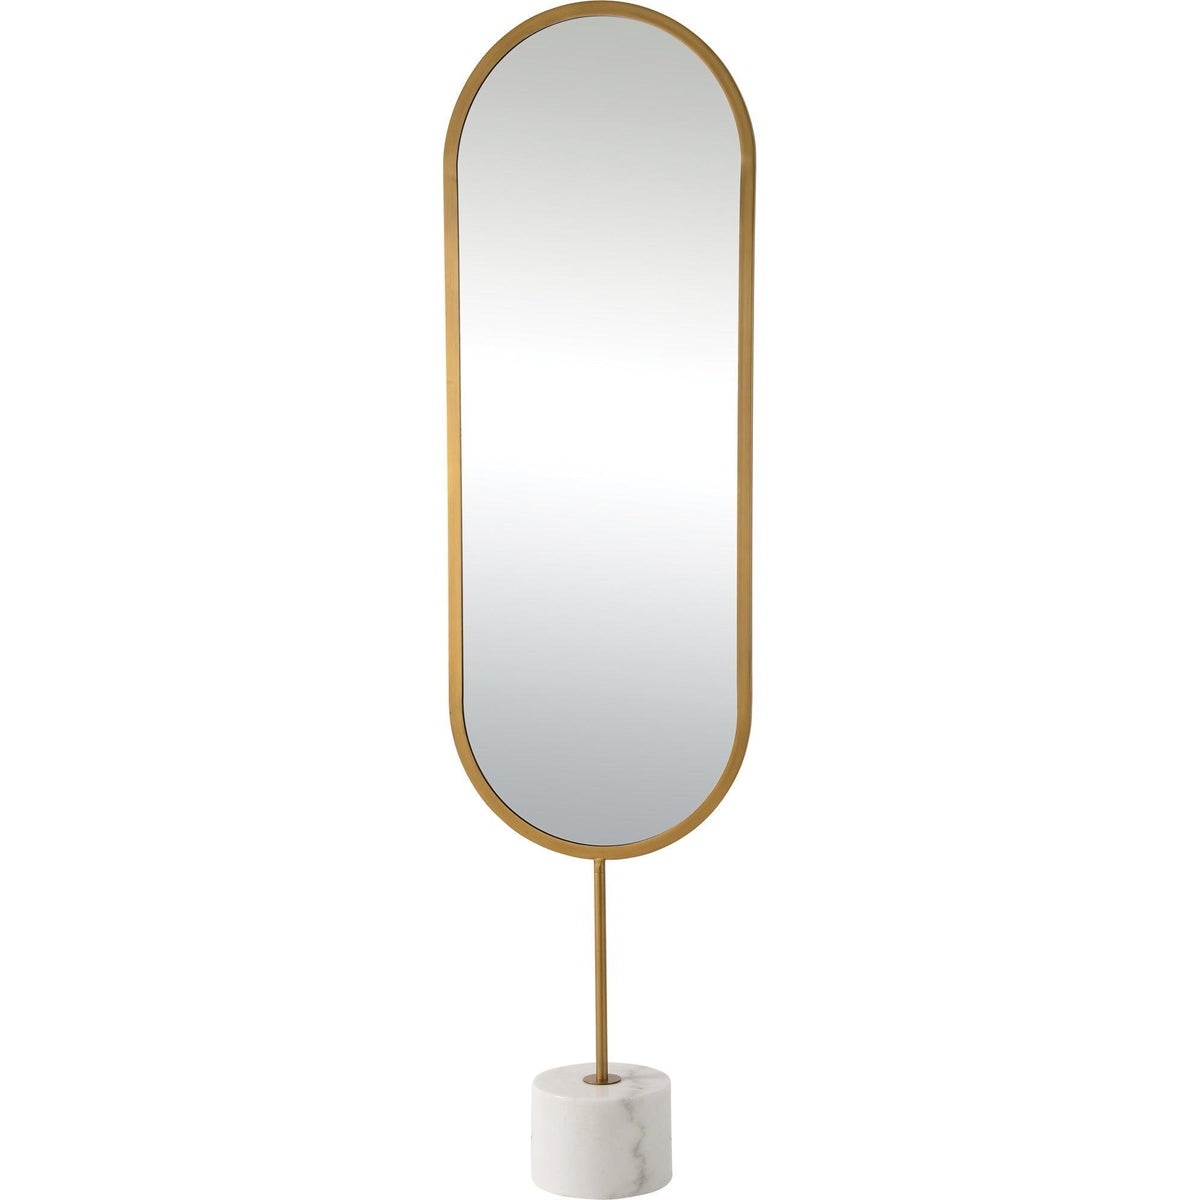 Renwil - Taio Oval Mirror - MT2341 | Montreal Lighting & Hardware